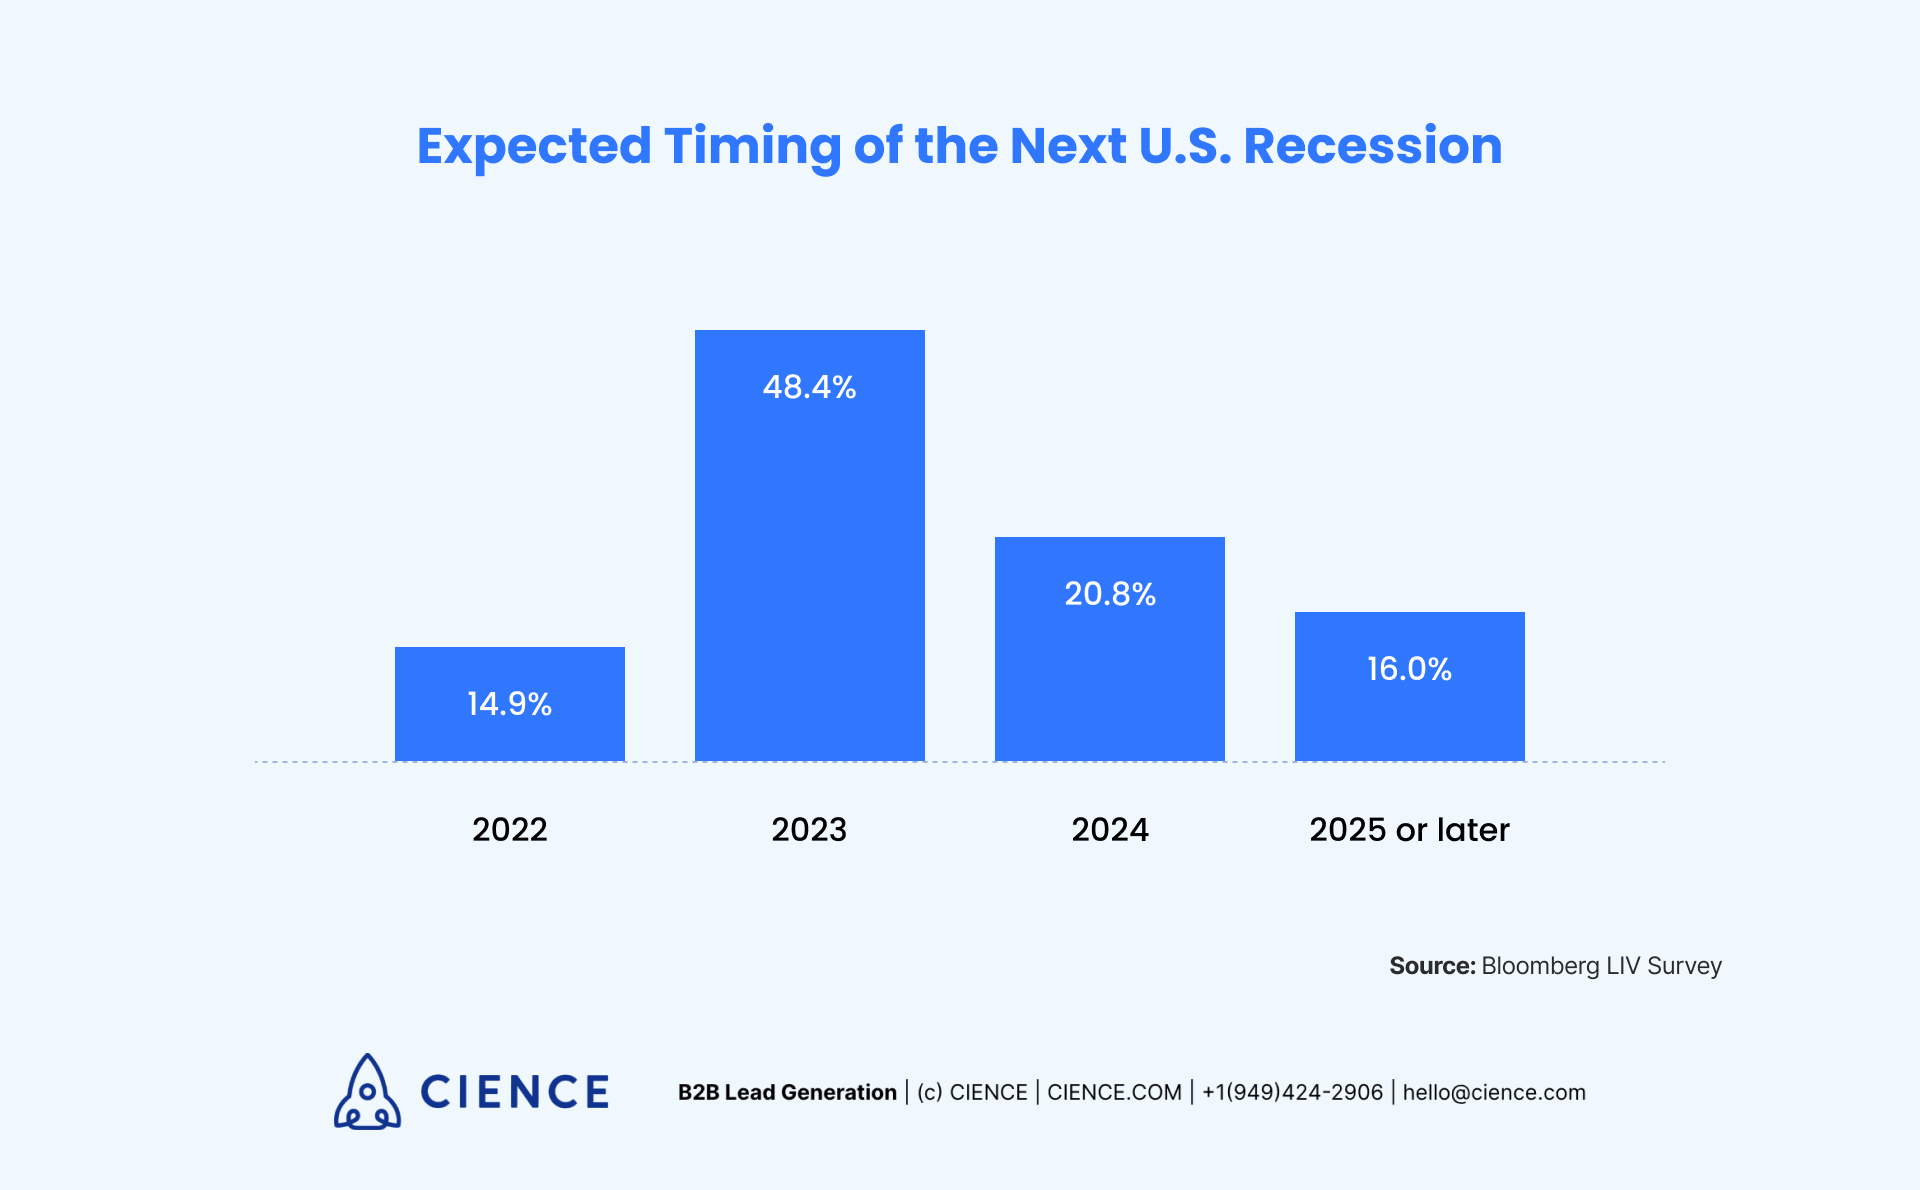 Expected timing of the next US recession